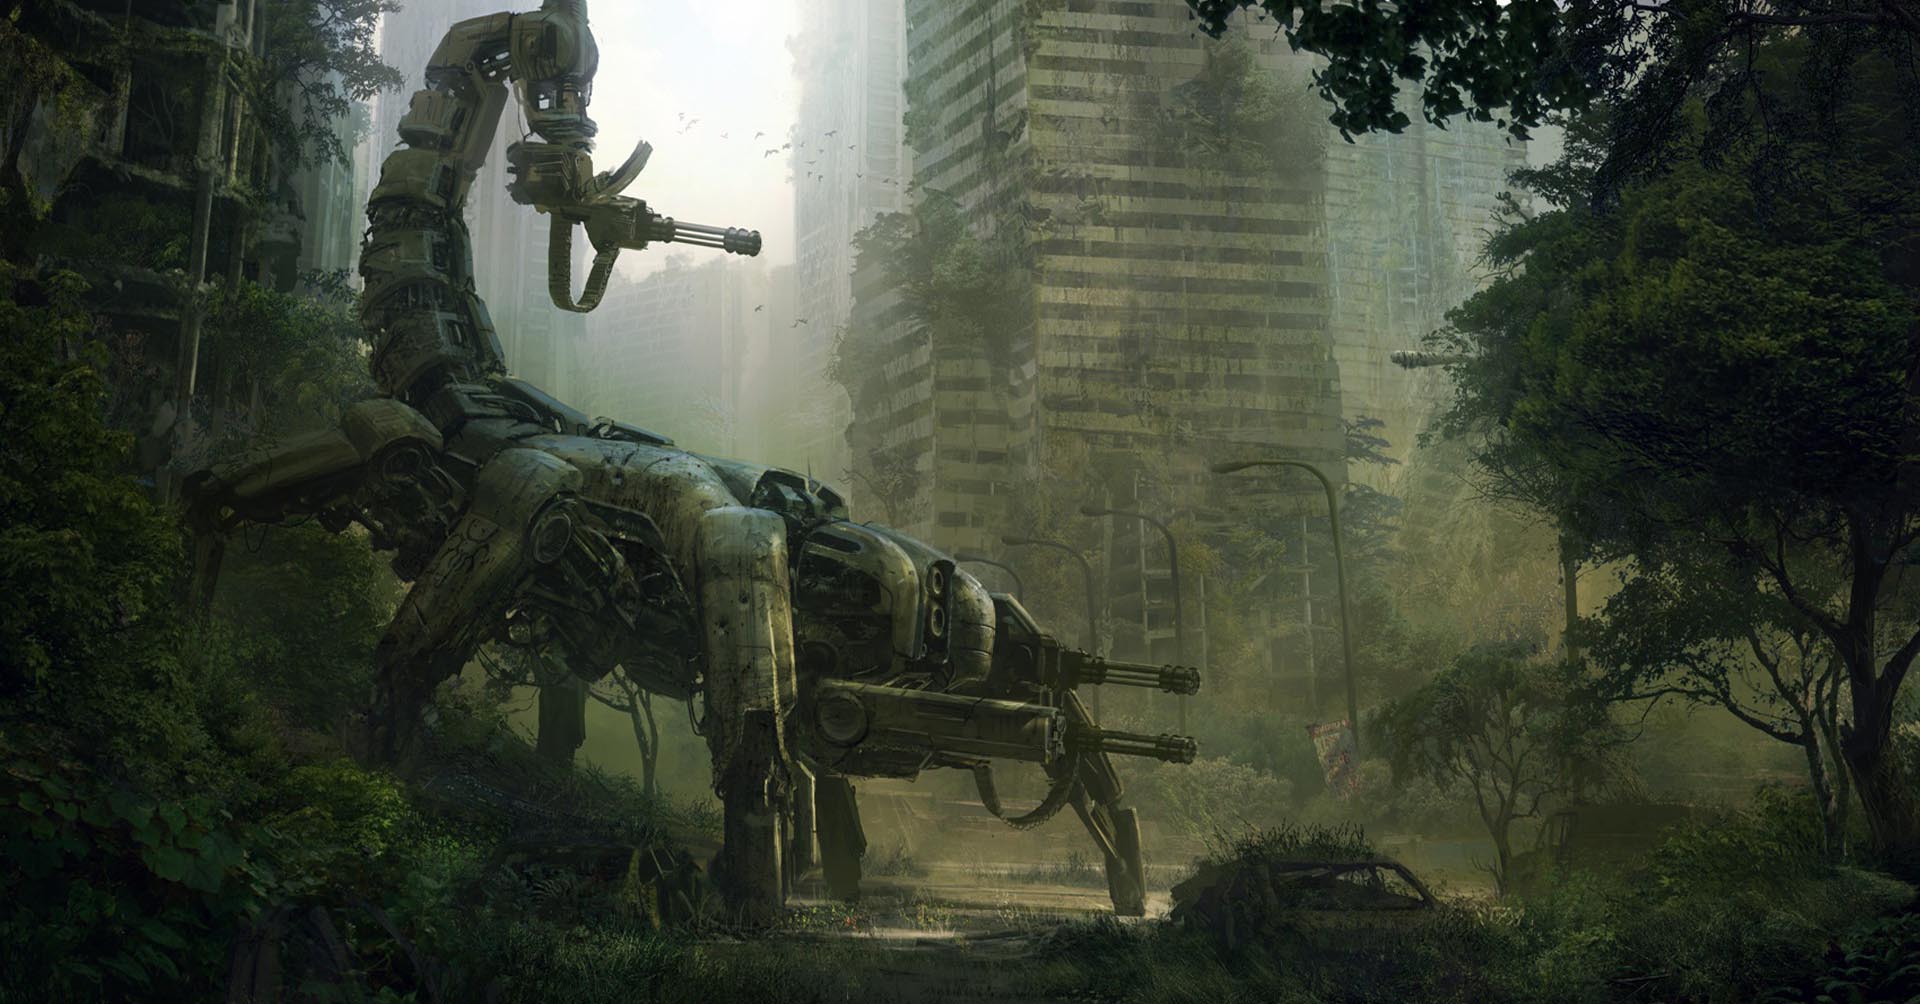 Trees Cityscapes Robots Cyborgs Weapons Apocalypse Colossus Science Fiction Scorpions Wasteland Wallpaper